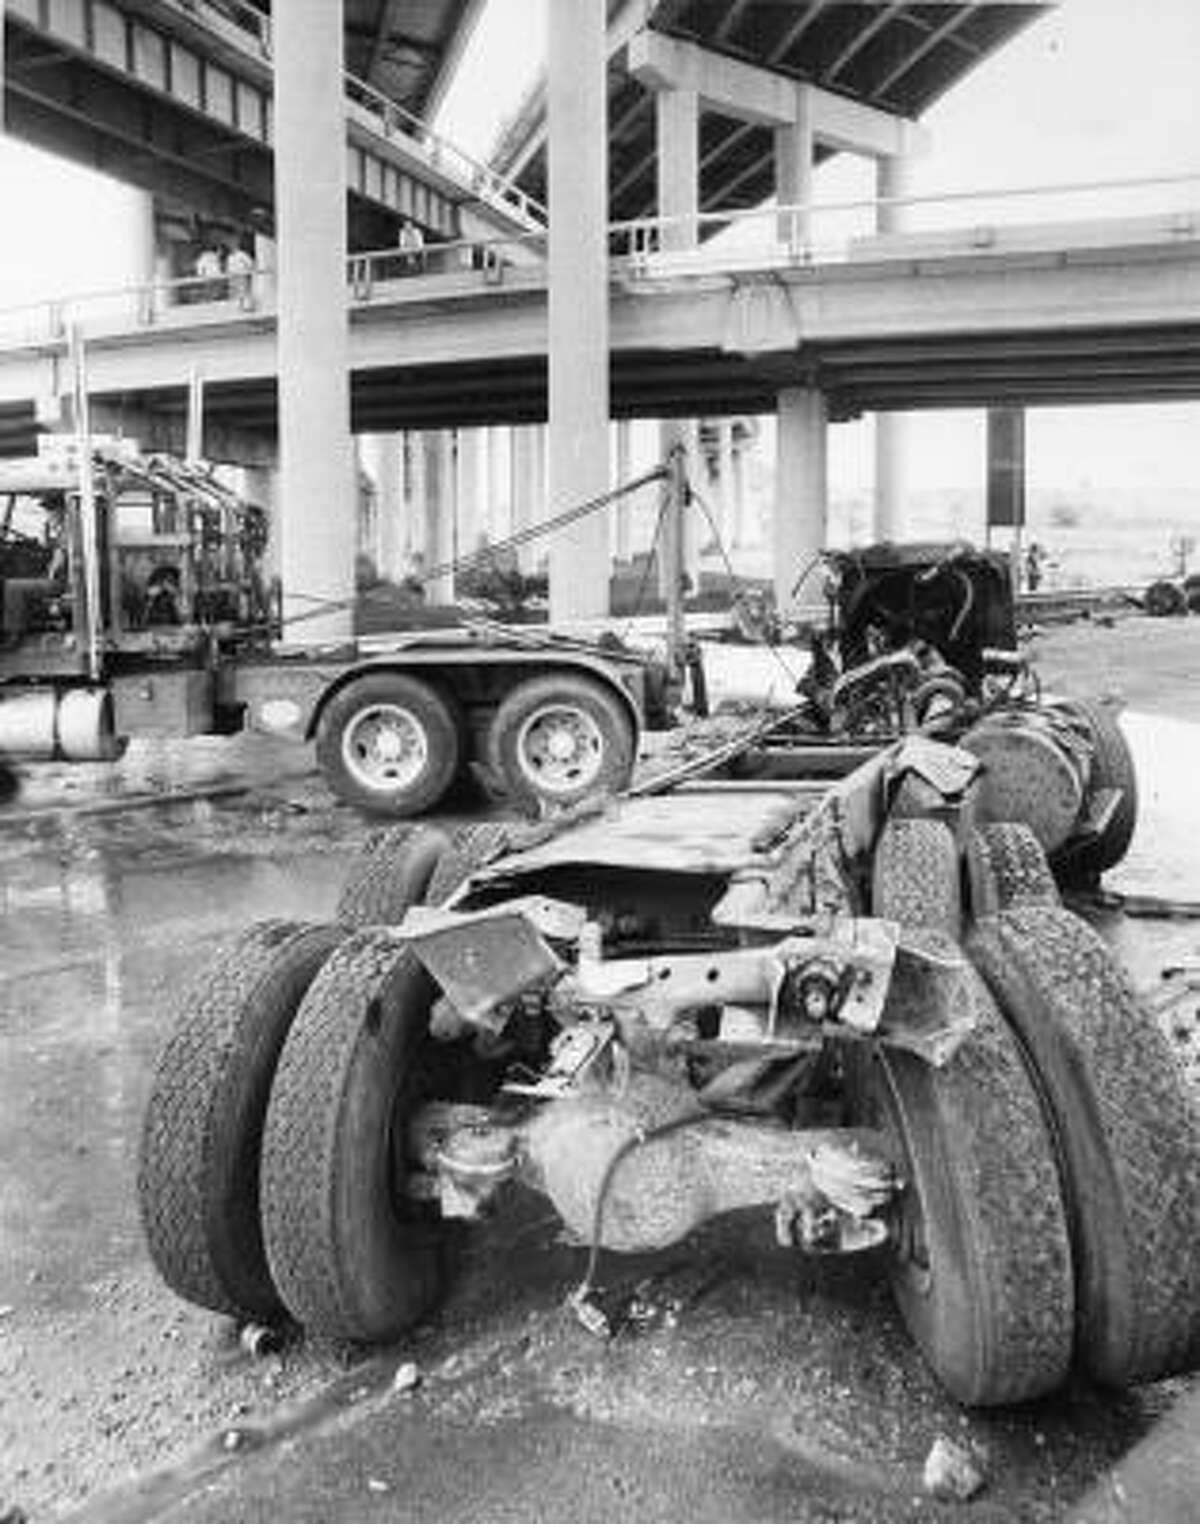 This photo shows the ammonia truck's chassis and vehicle parts being hauled away after the fatal accident and chemical spill of May, 11, 1976.